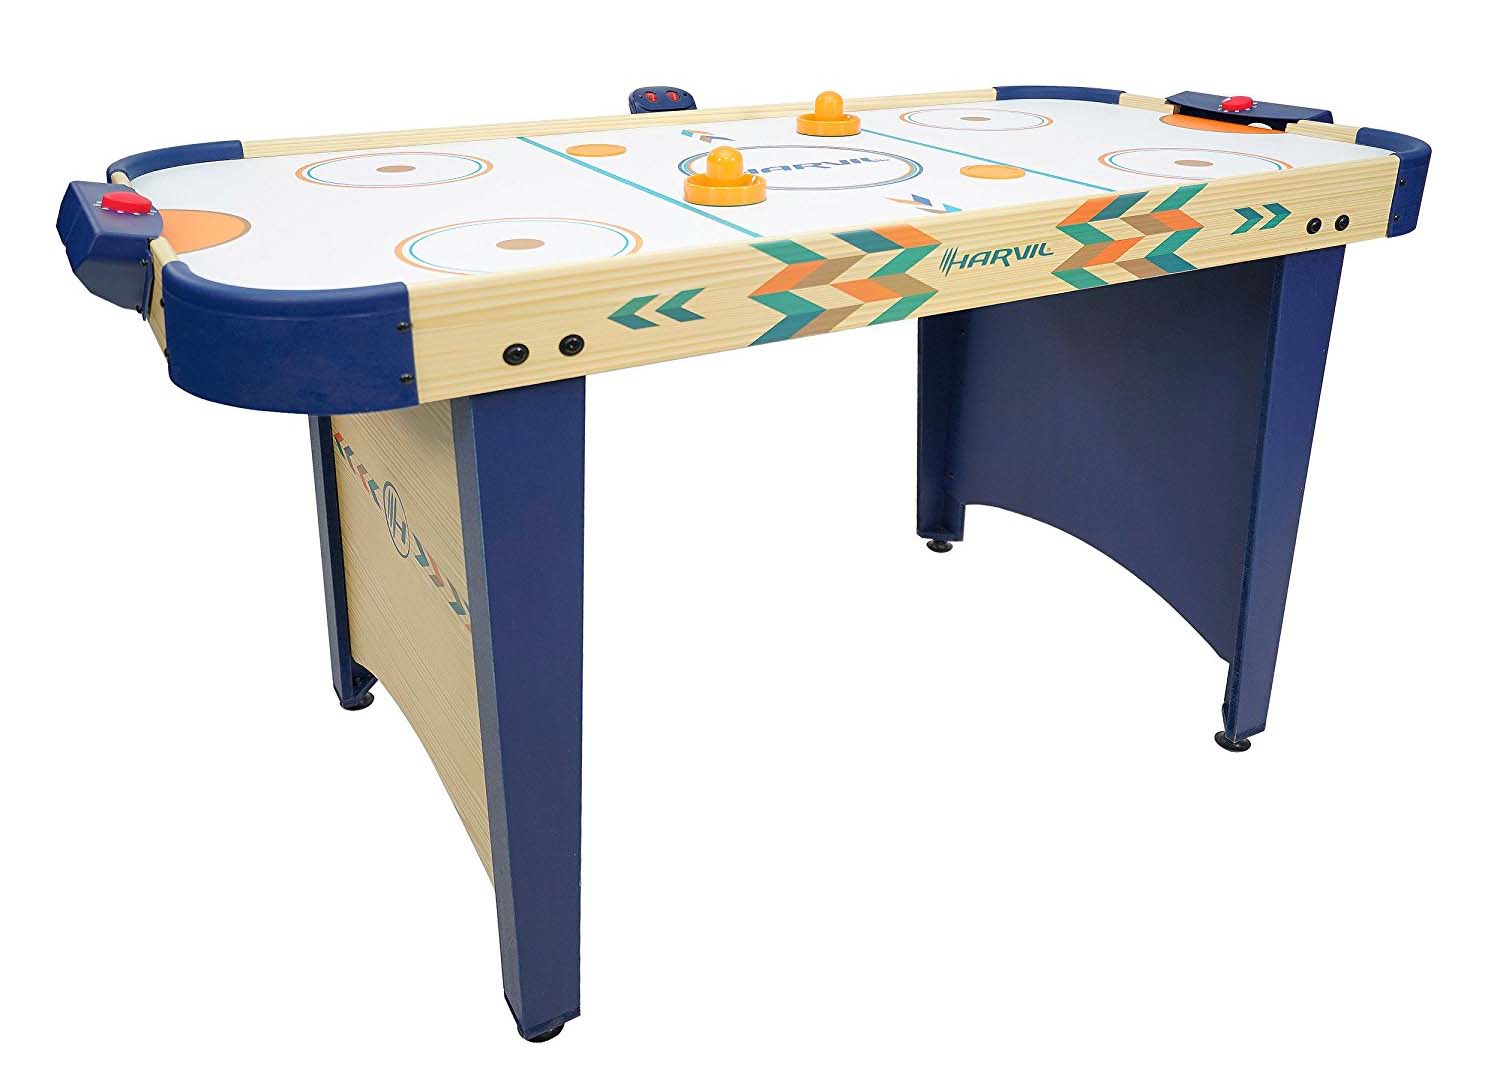 Harvil 4 Foot Air Hockey Game Table for Kids